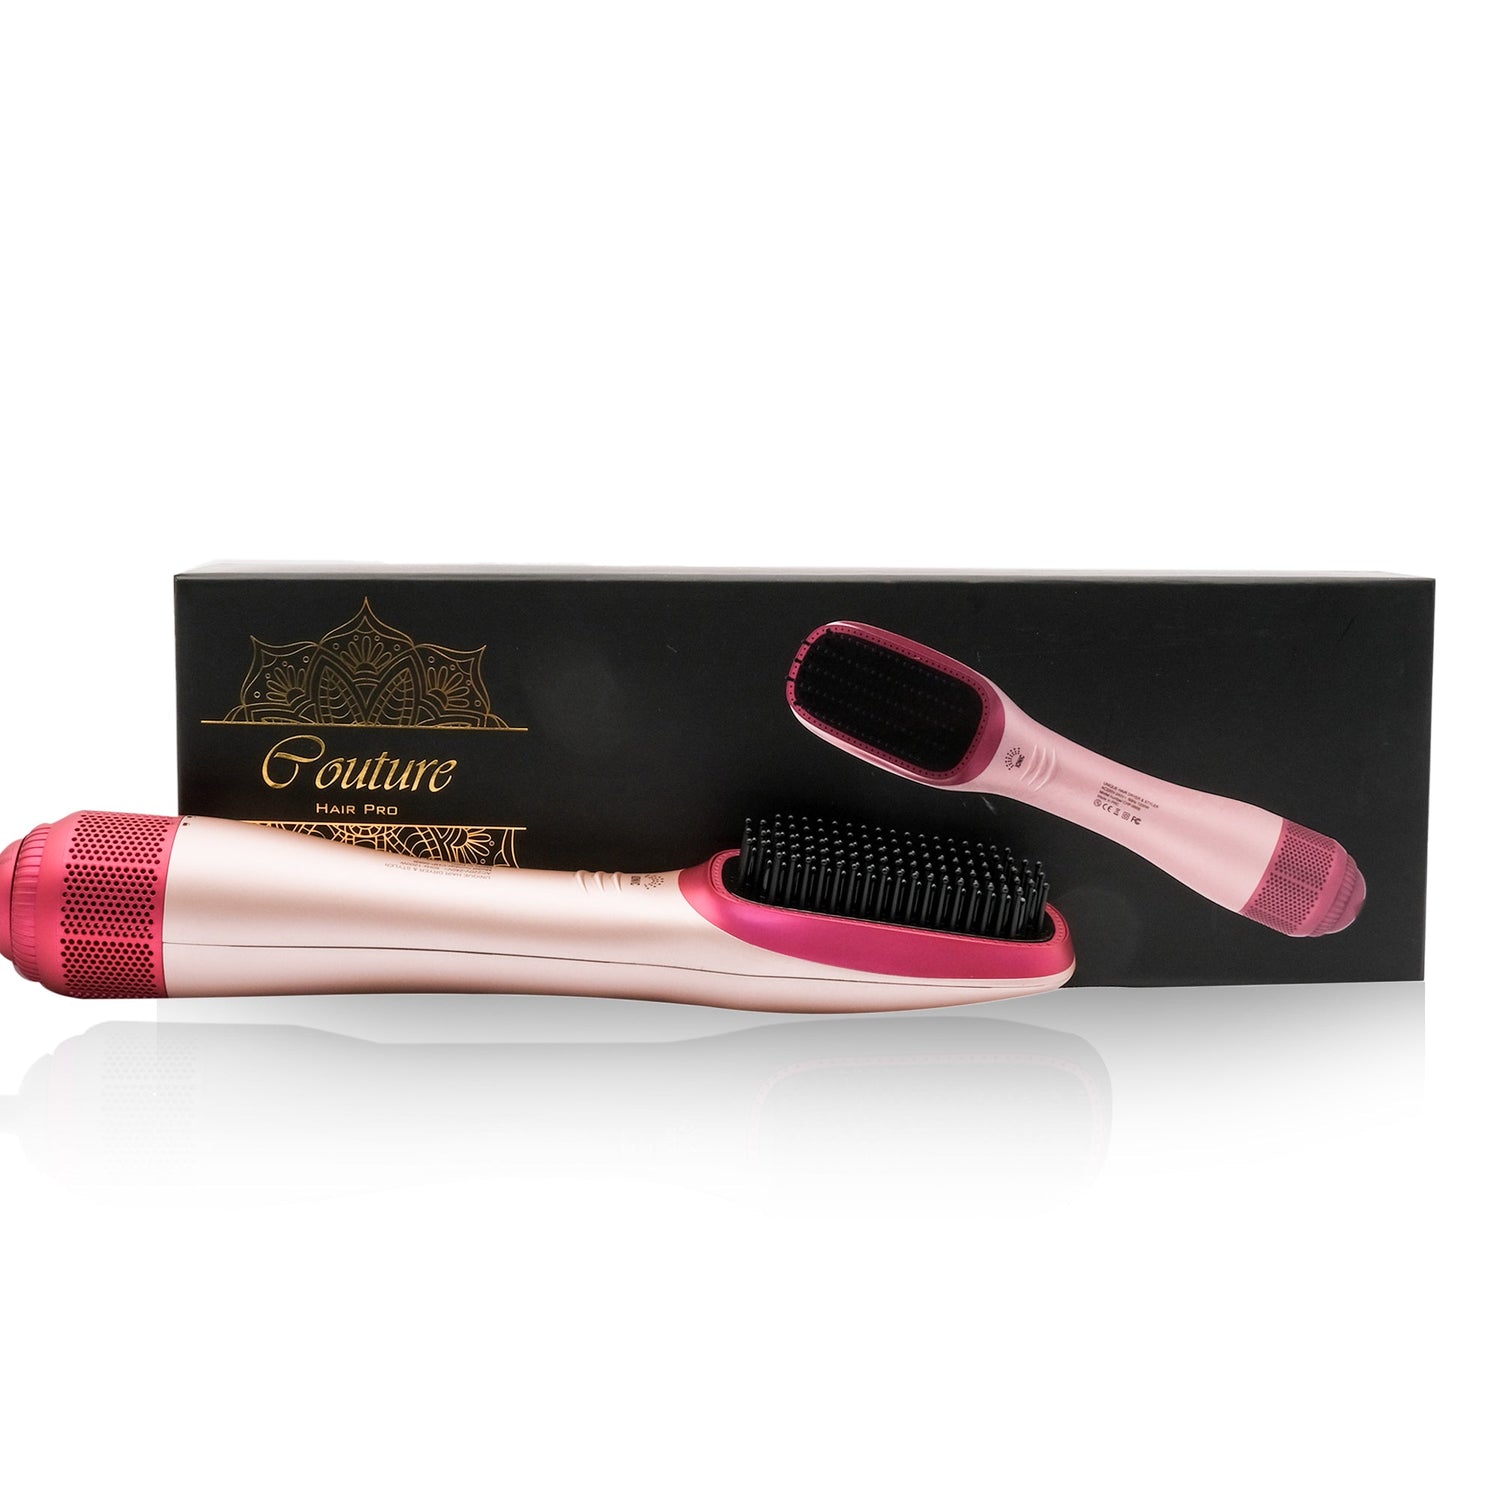 Couture Hair Pro Hot Air Brush & Dryer with Antiscald Ceramic Bristles- Peach - Couture Hair Pro